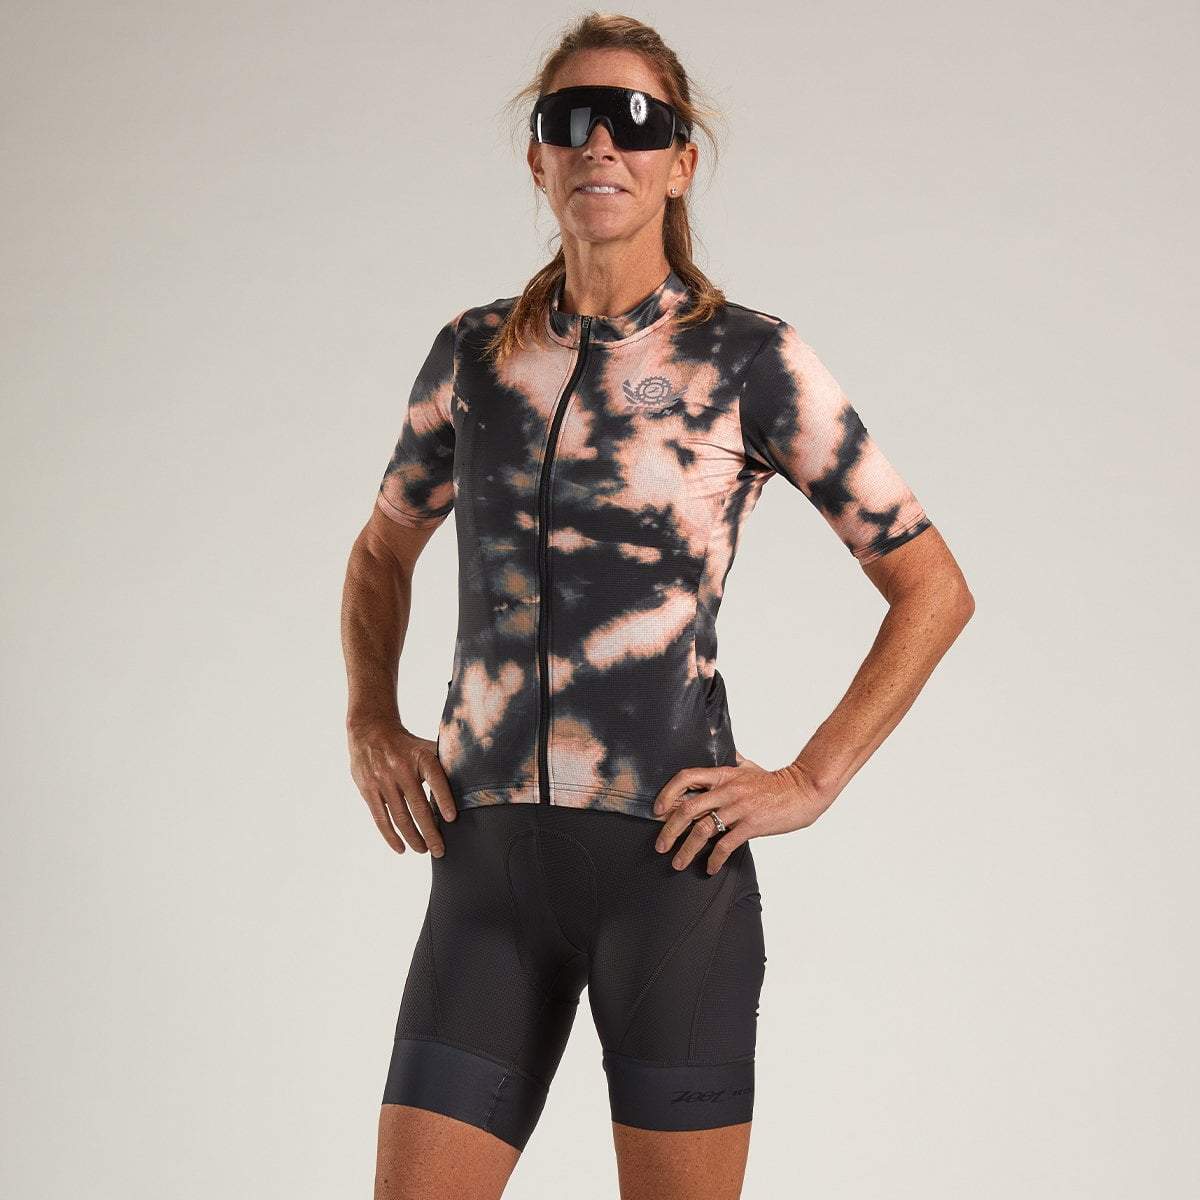 Zoot Sports CYCLE TOPS WOMENS RECON CYCLE JERSEY - BLEACHED